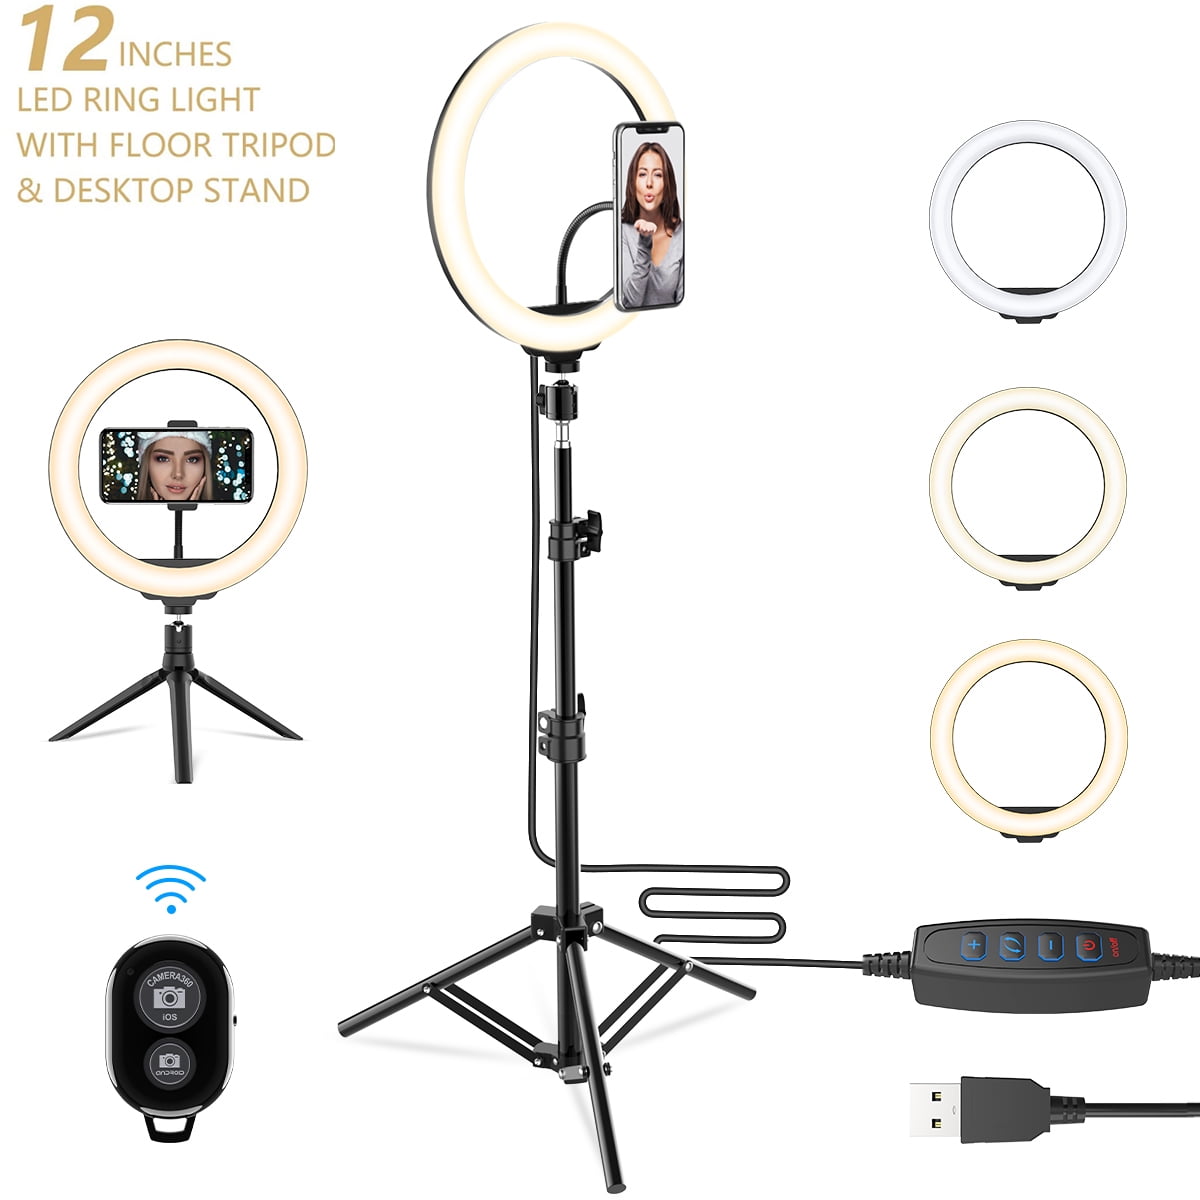 MOUNTDOG Dimmable Makeup Selfie Ringlight Lighting Kit for Photography/YouTube Videos/Live Stream/Camera 18 Inch LED Ring Light with Tripod Stand & 3 Phone Holder & 2 Bluetooth Remotes 